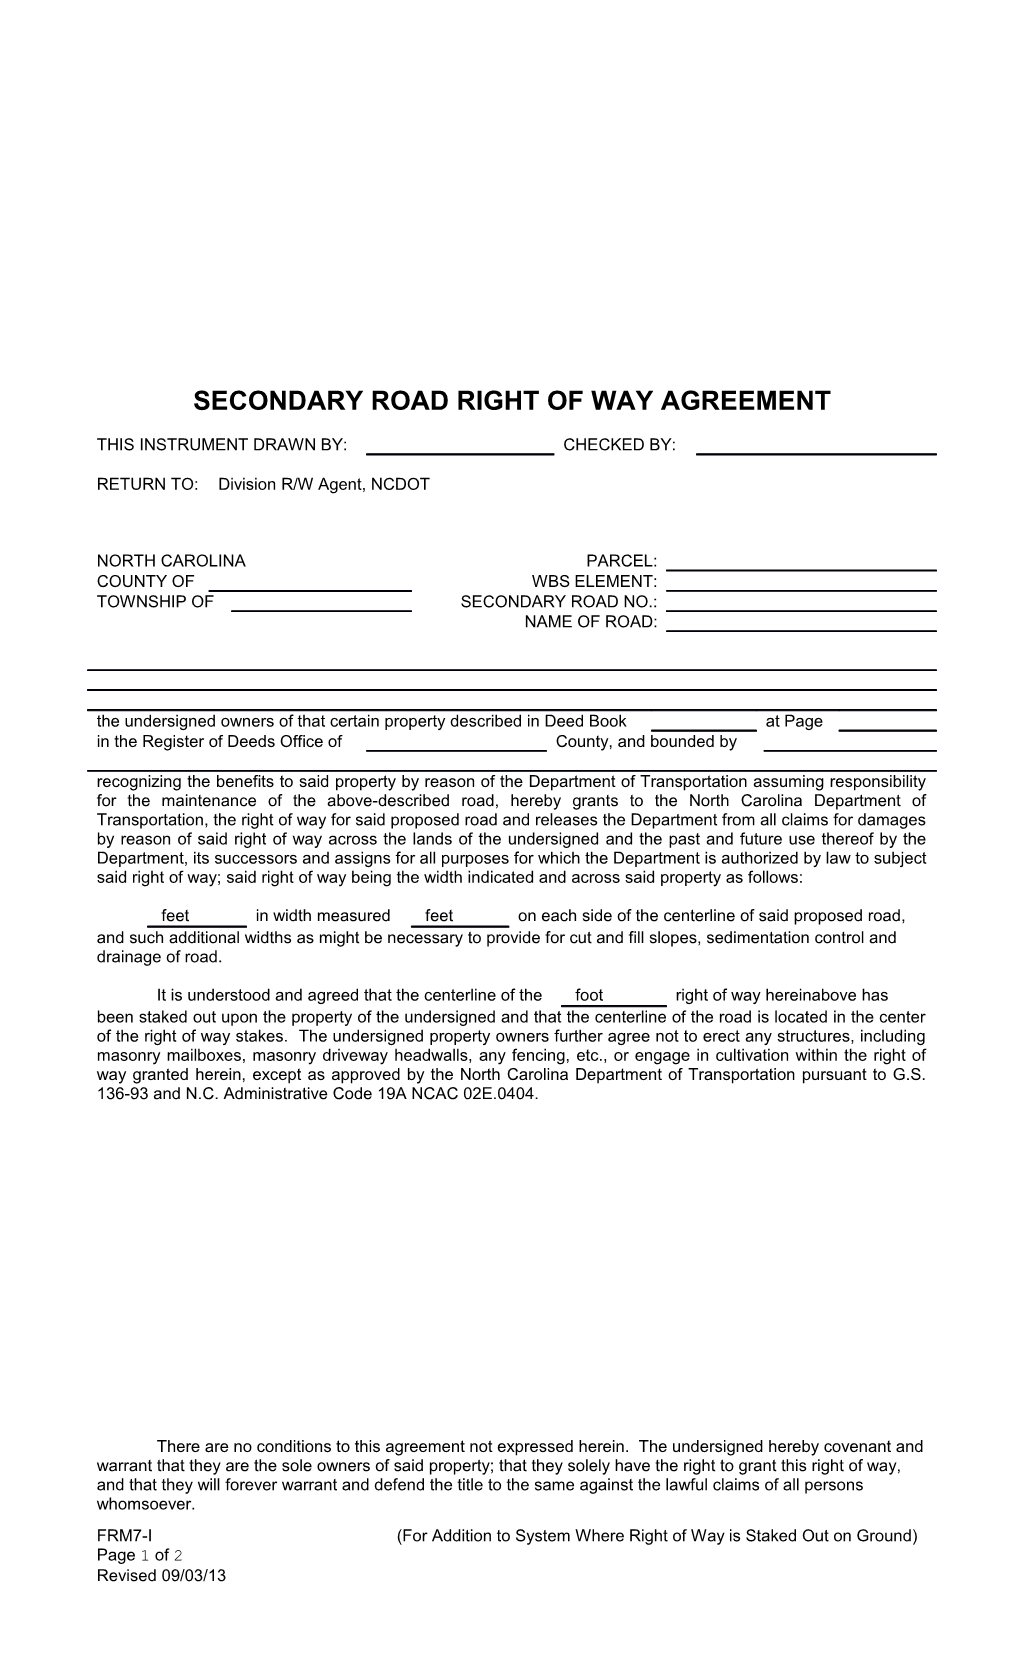 Secondary Road Right of Way Agreement (For Addition to System Where Right of Way Is Staked